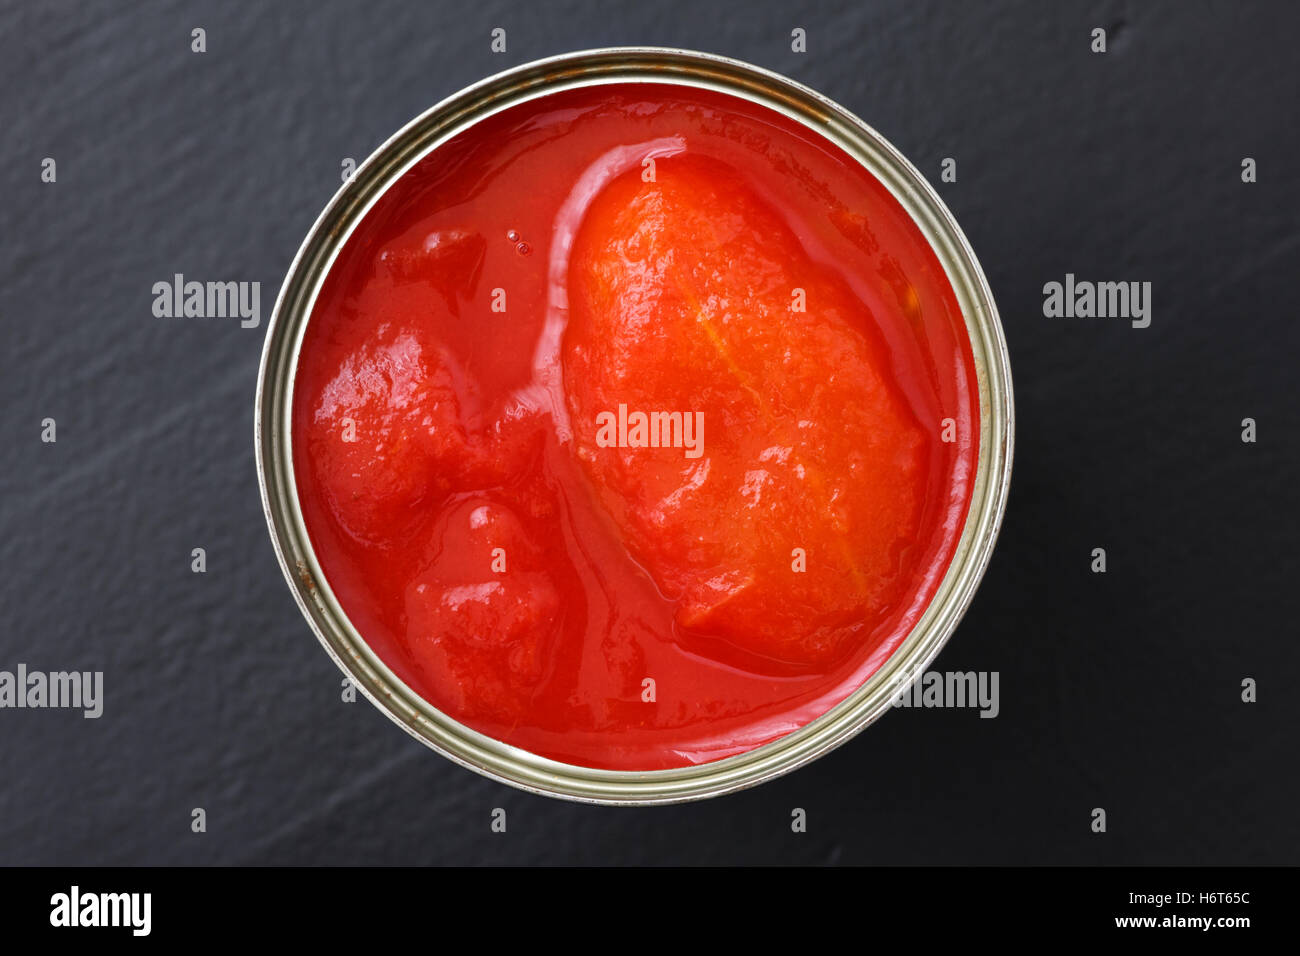 Whole canned tomatoes from above on black wood. Stock Photo